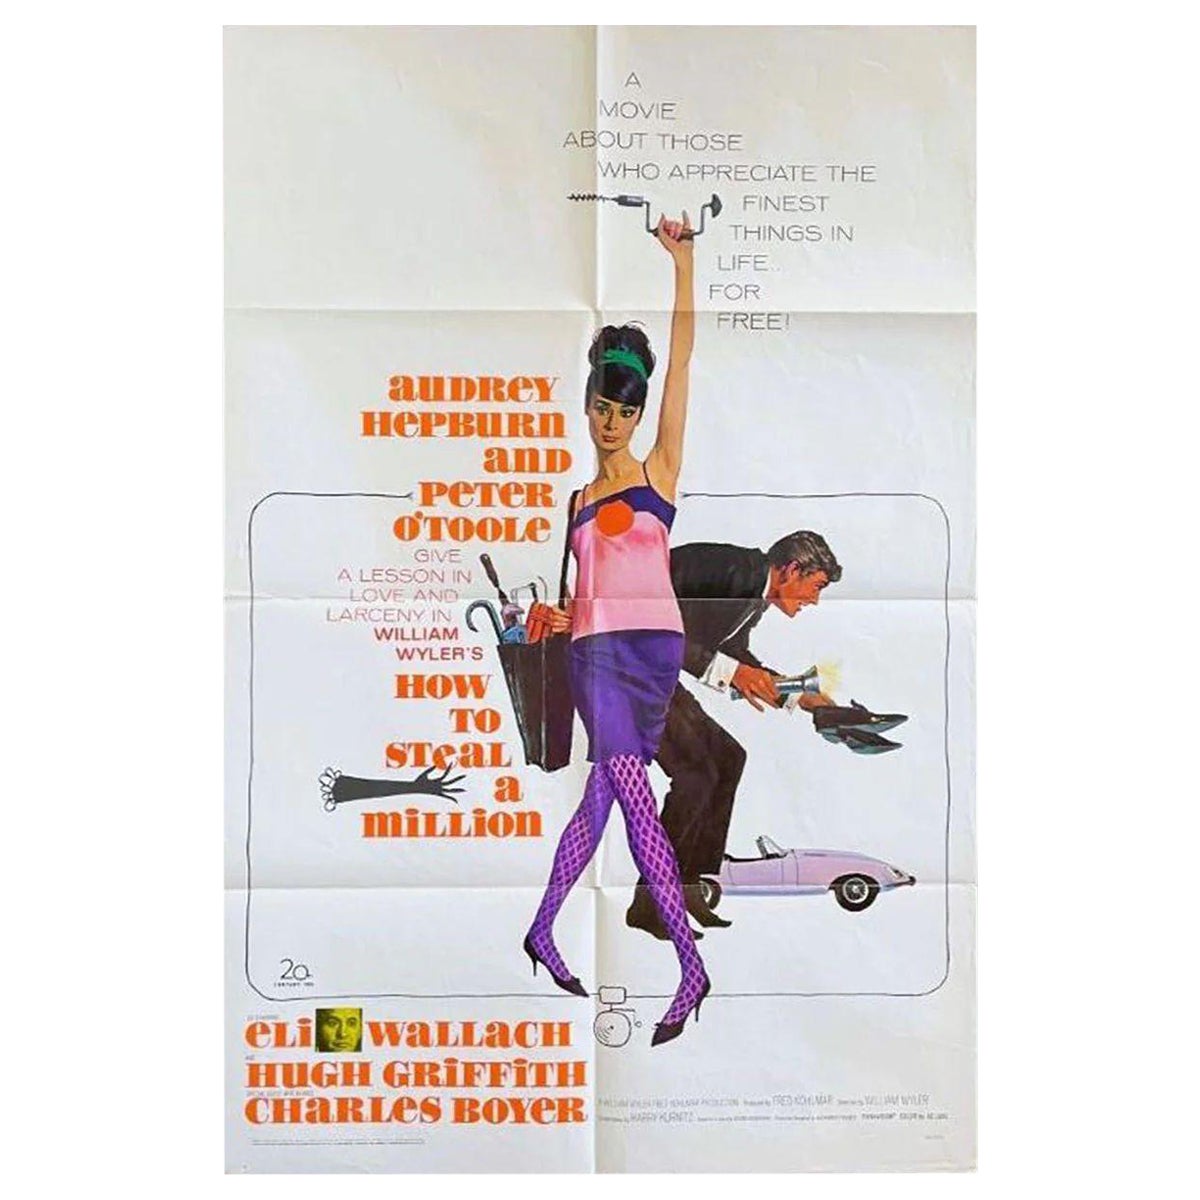 How To Steal A Million, Unframed Poster, 1966 For Sale